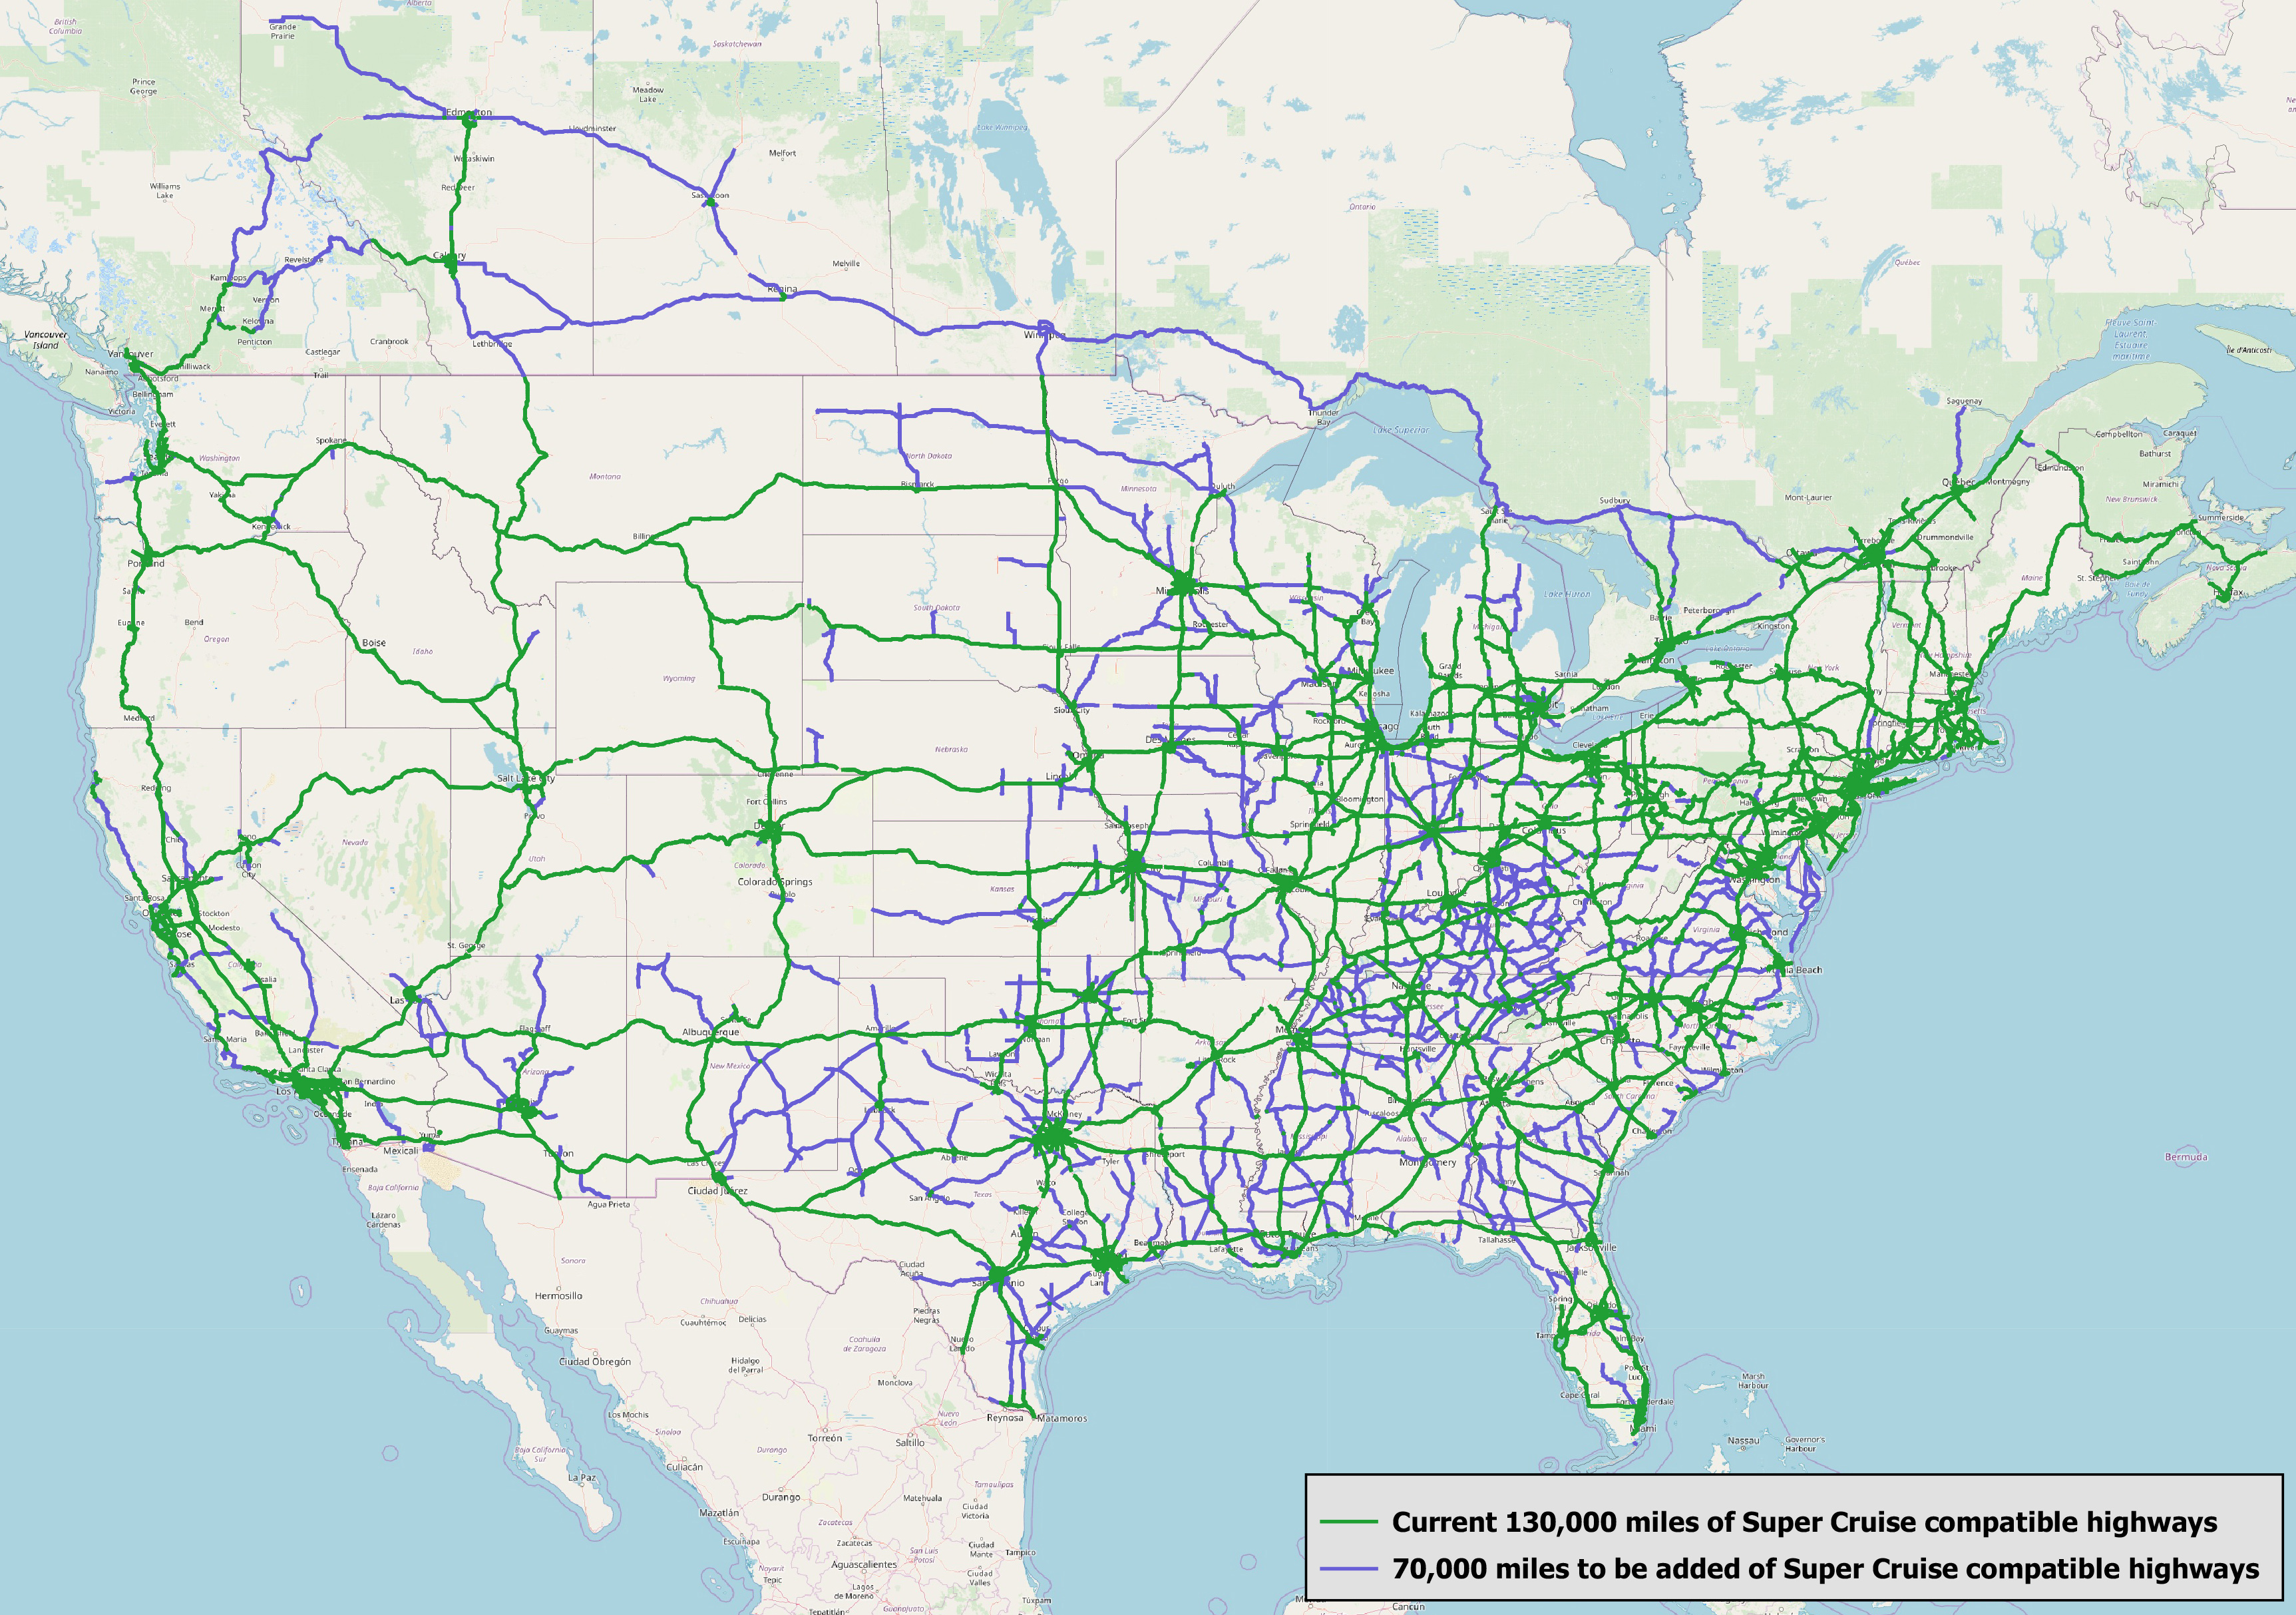 Cadillac to Increase Super Cruise Compatible Highway Network